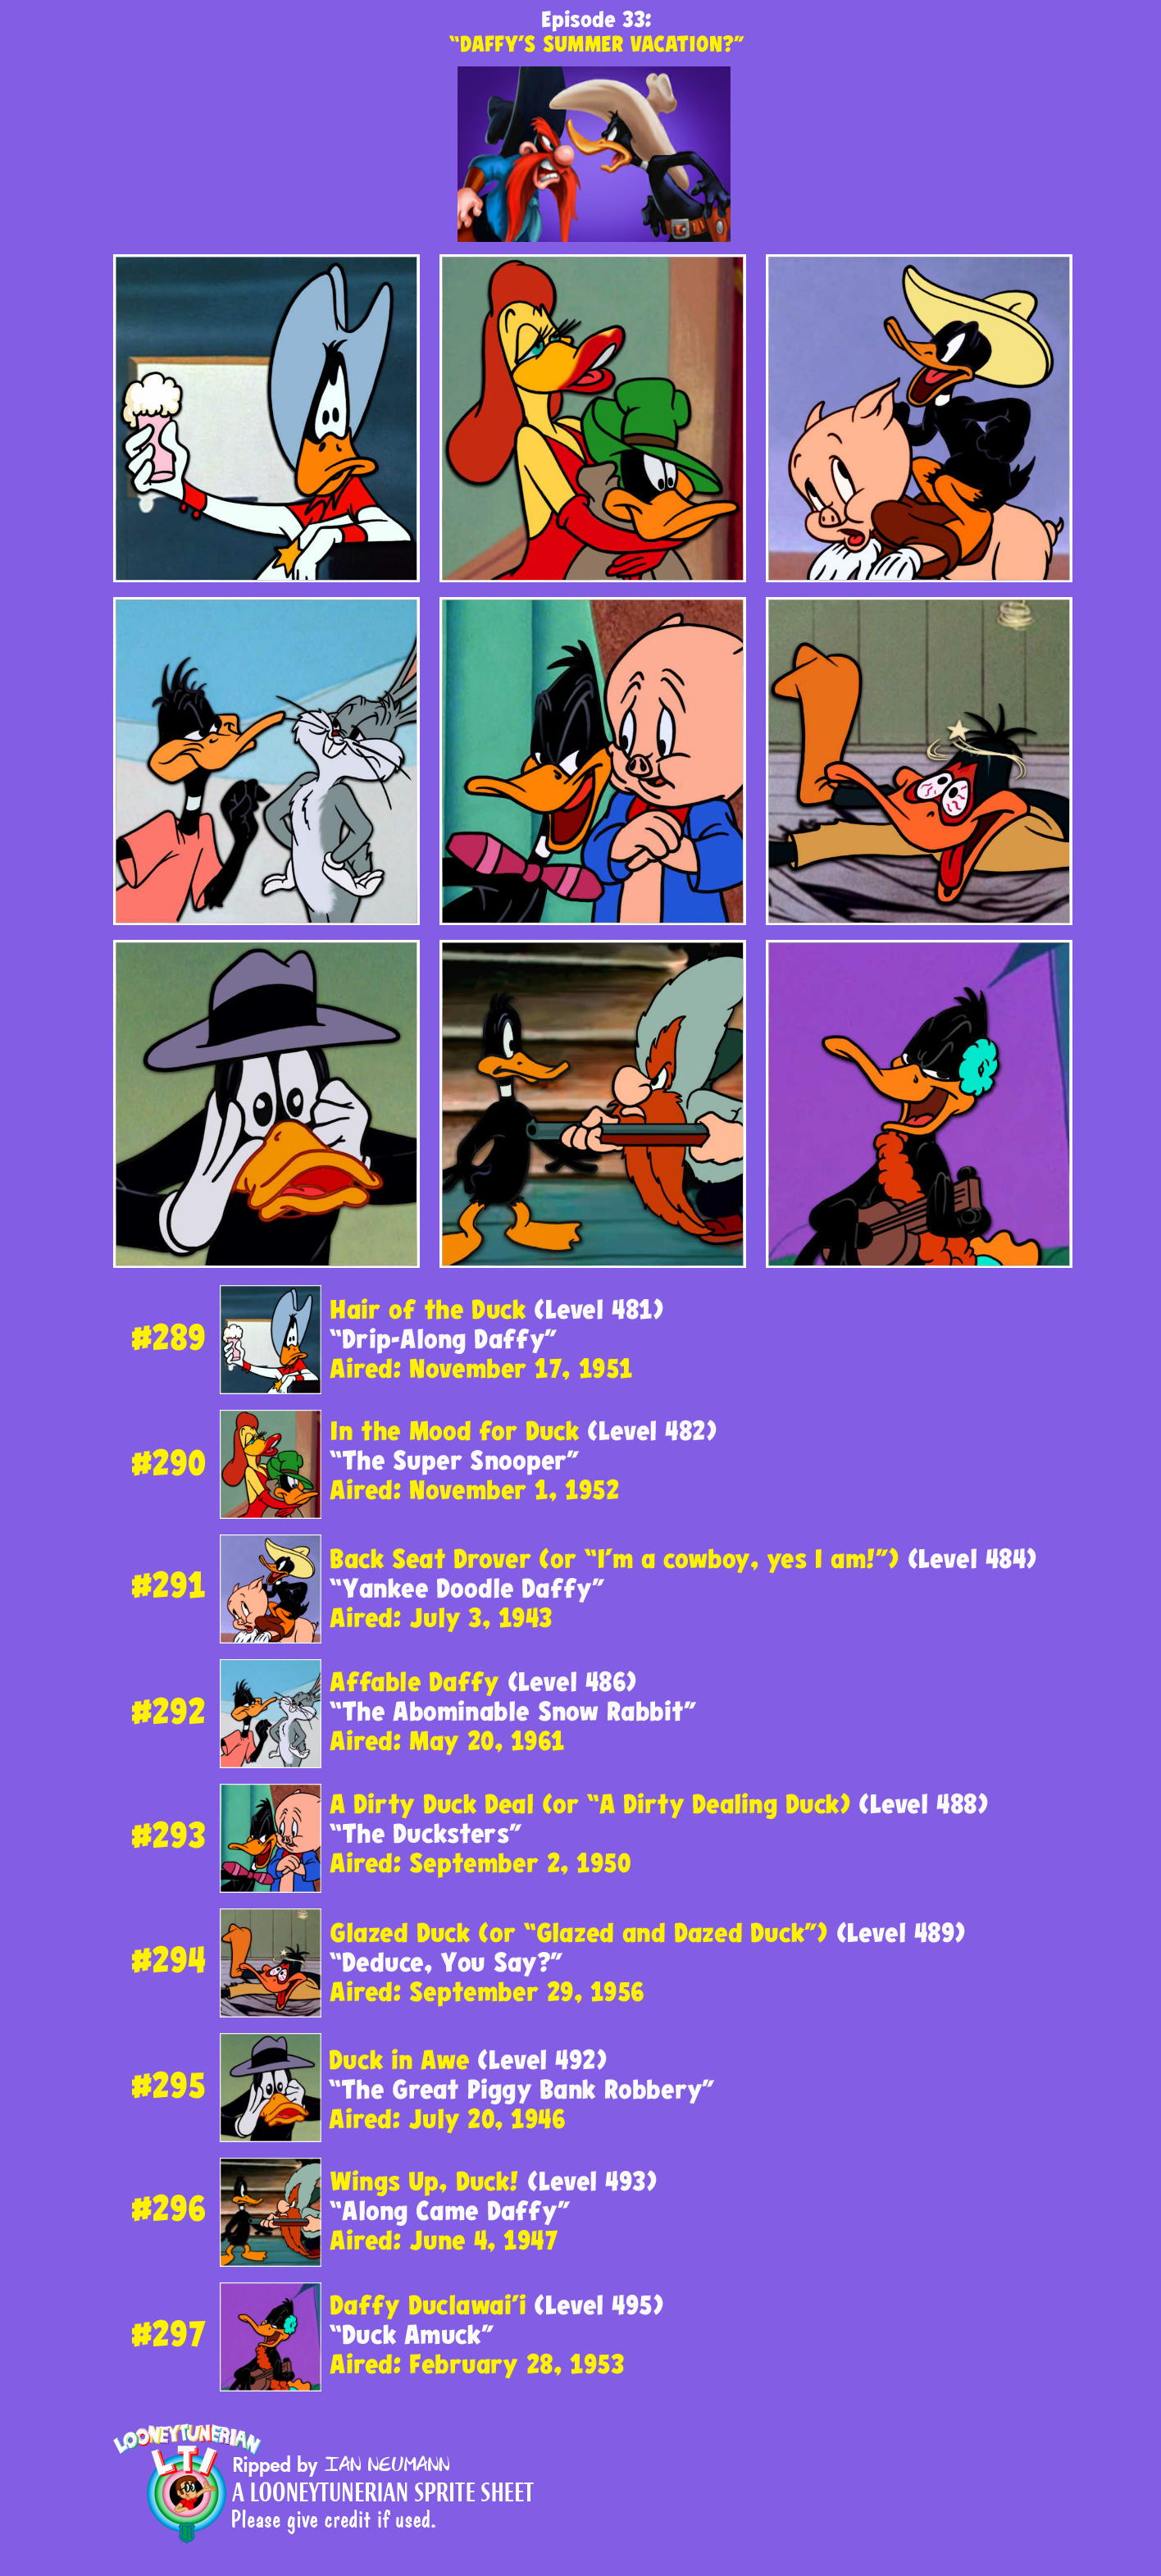 Episode 33: "Daffy's Summer Vacation?"